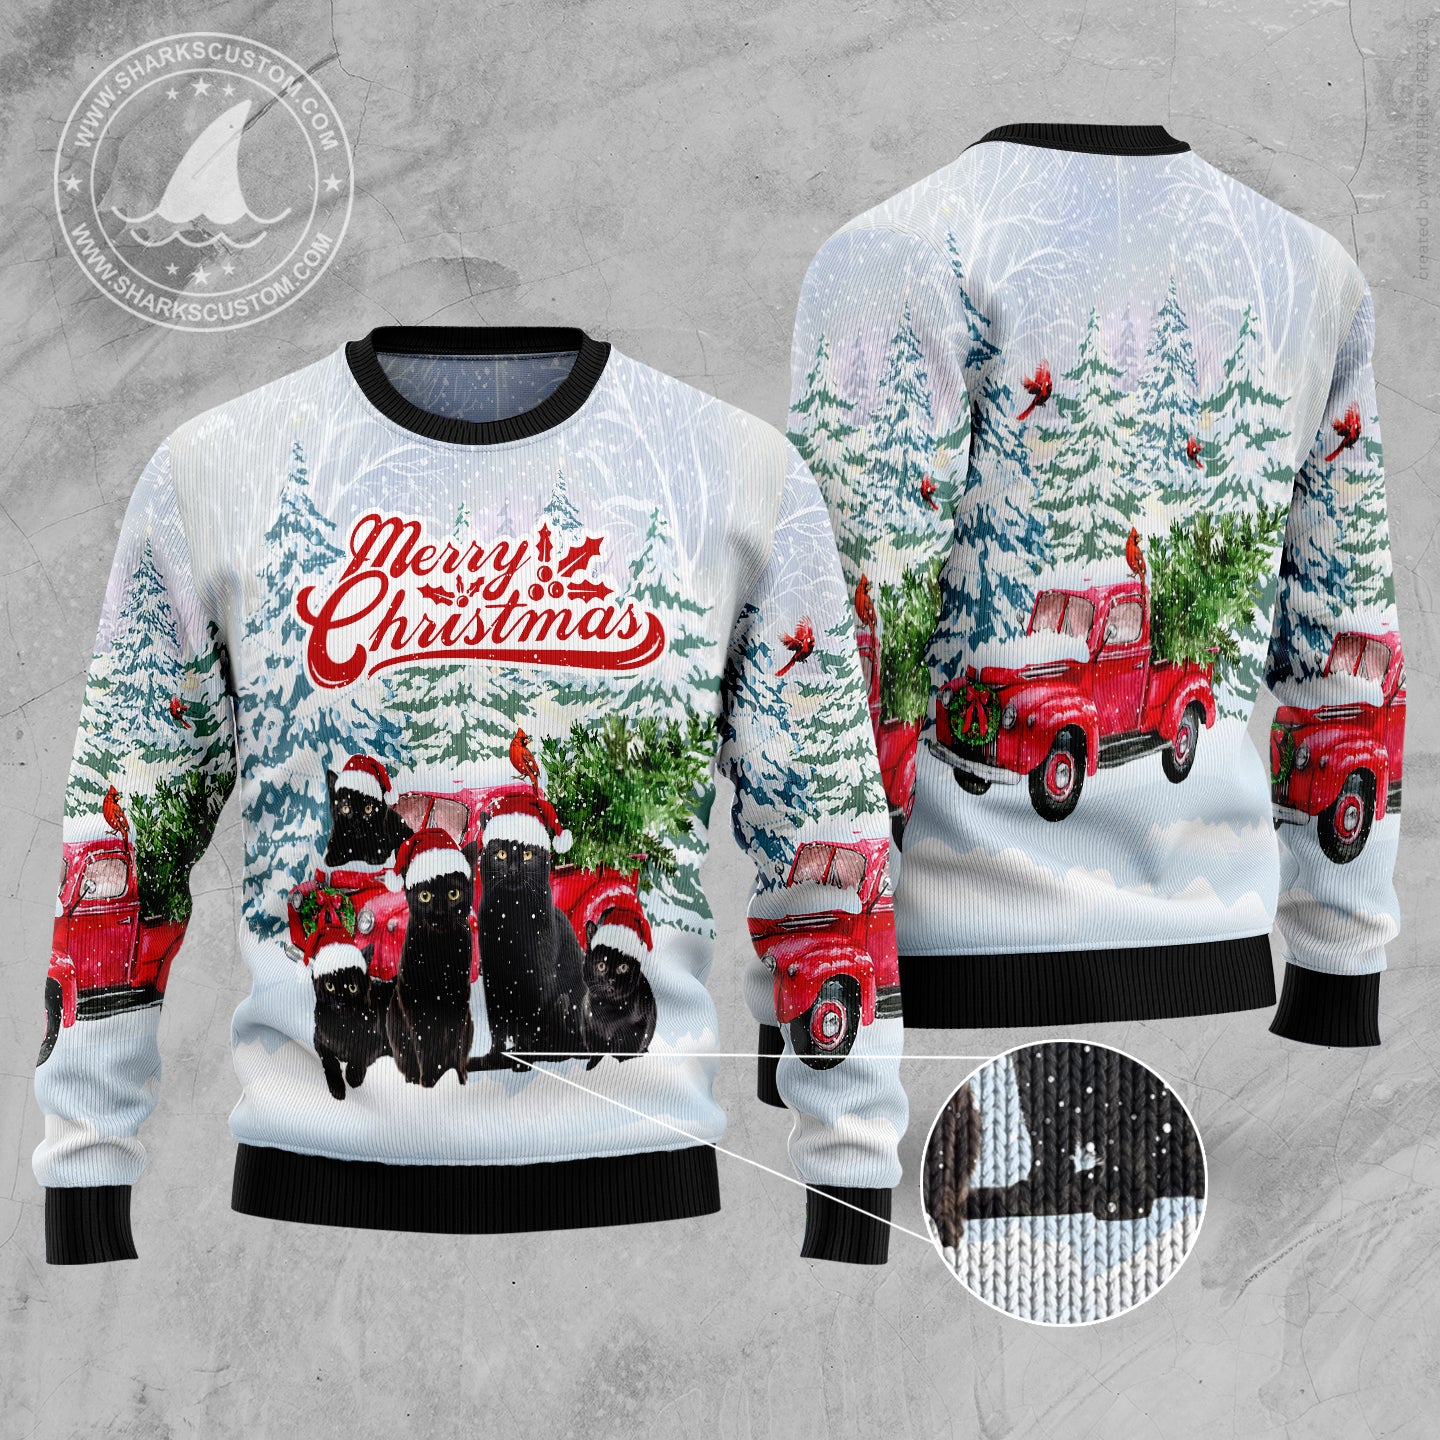 Black Cat Merry Christmas TG5115 Ugly Christmas Sweater